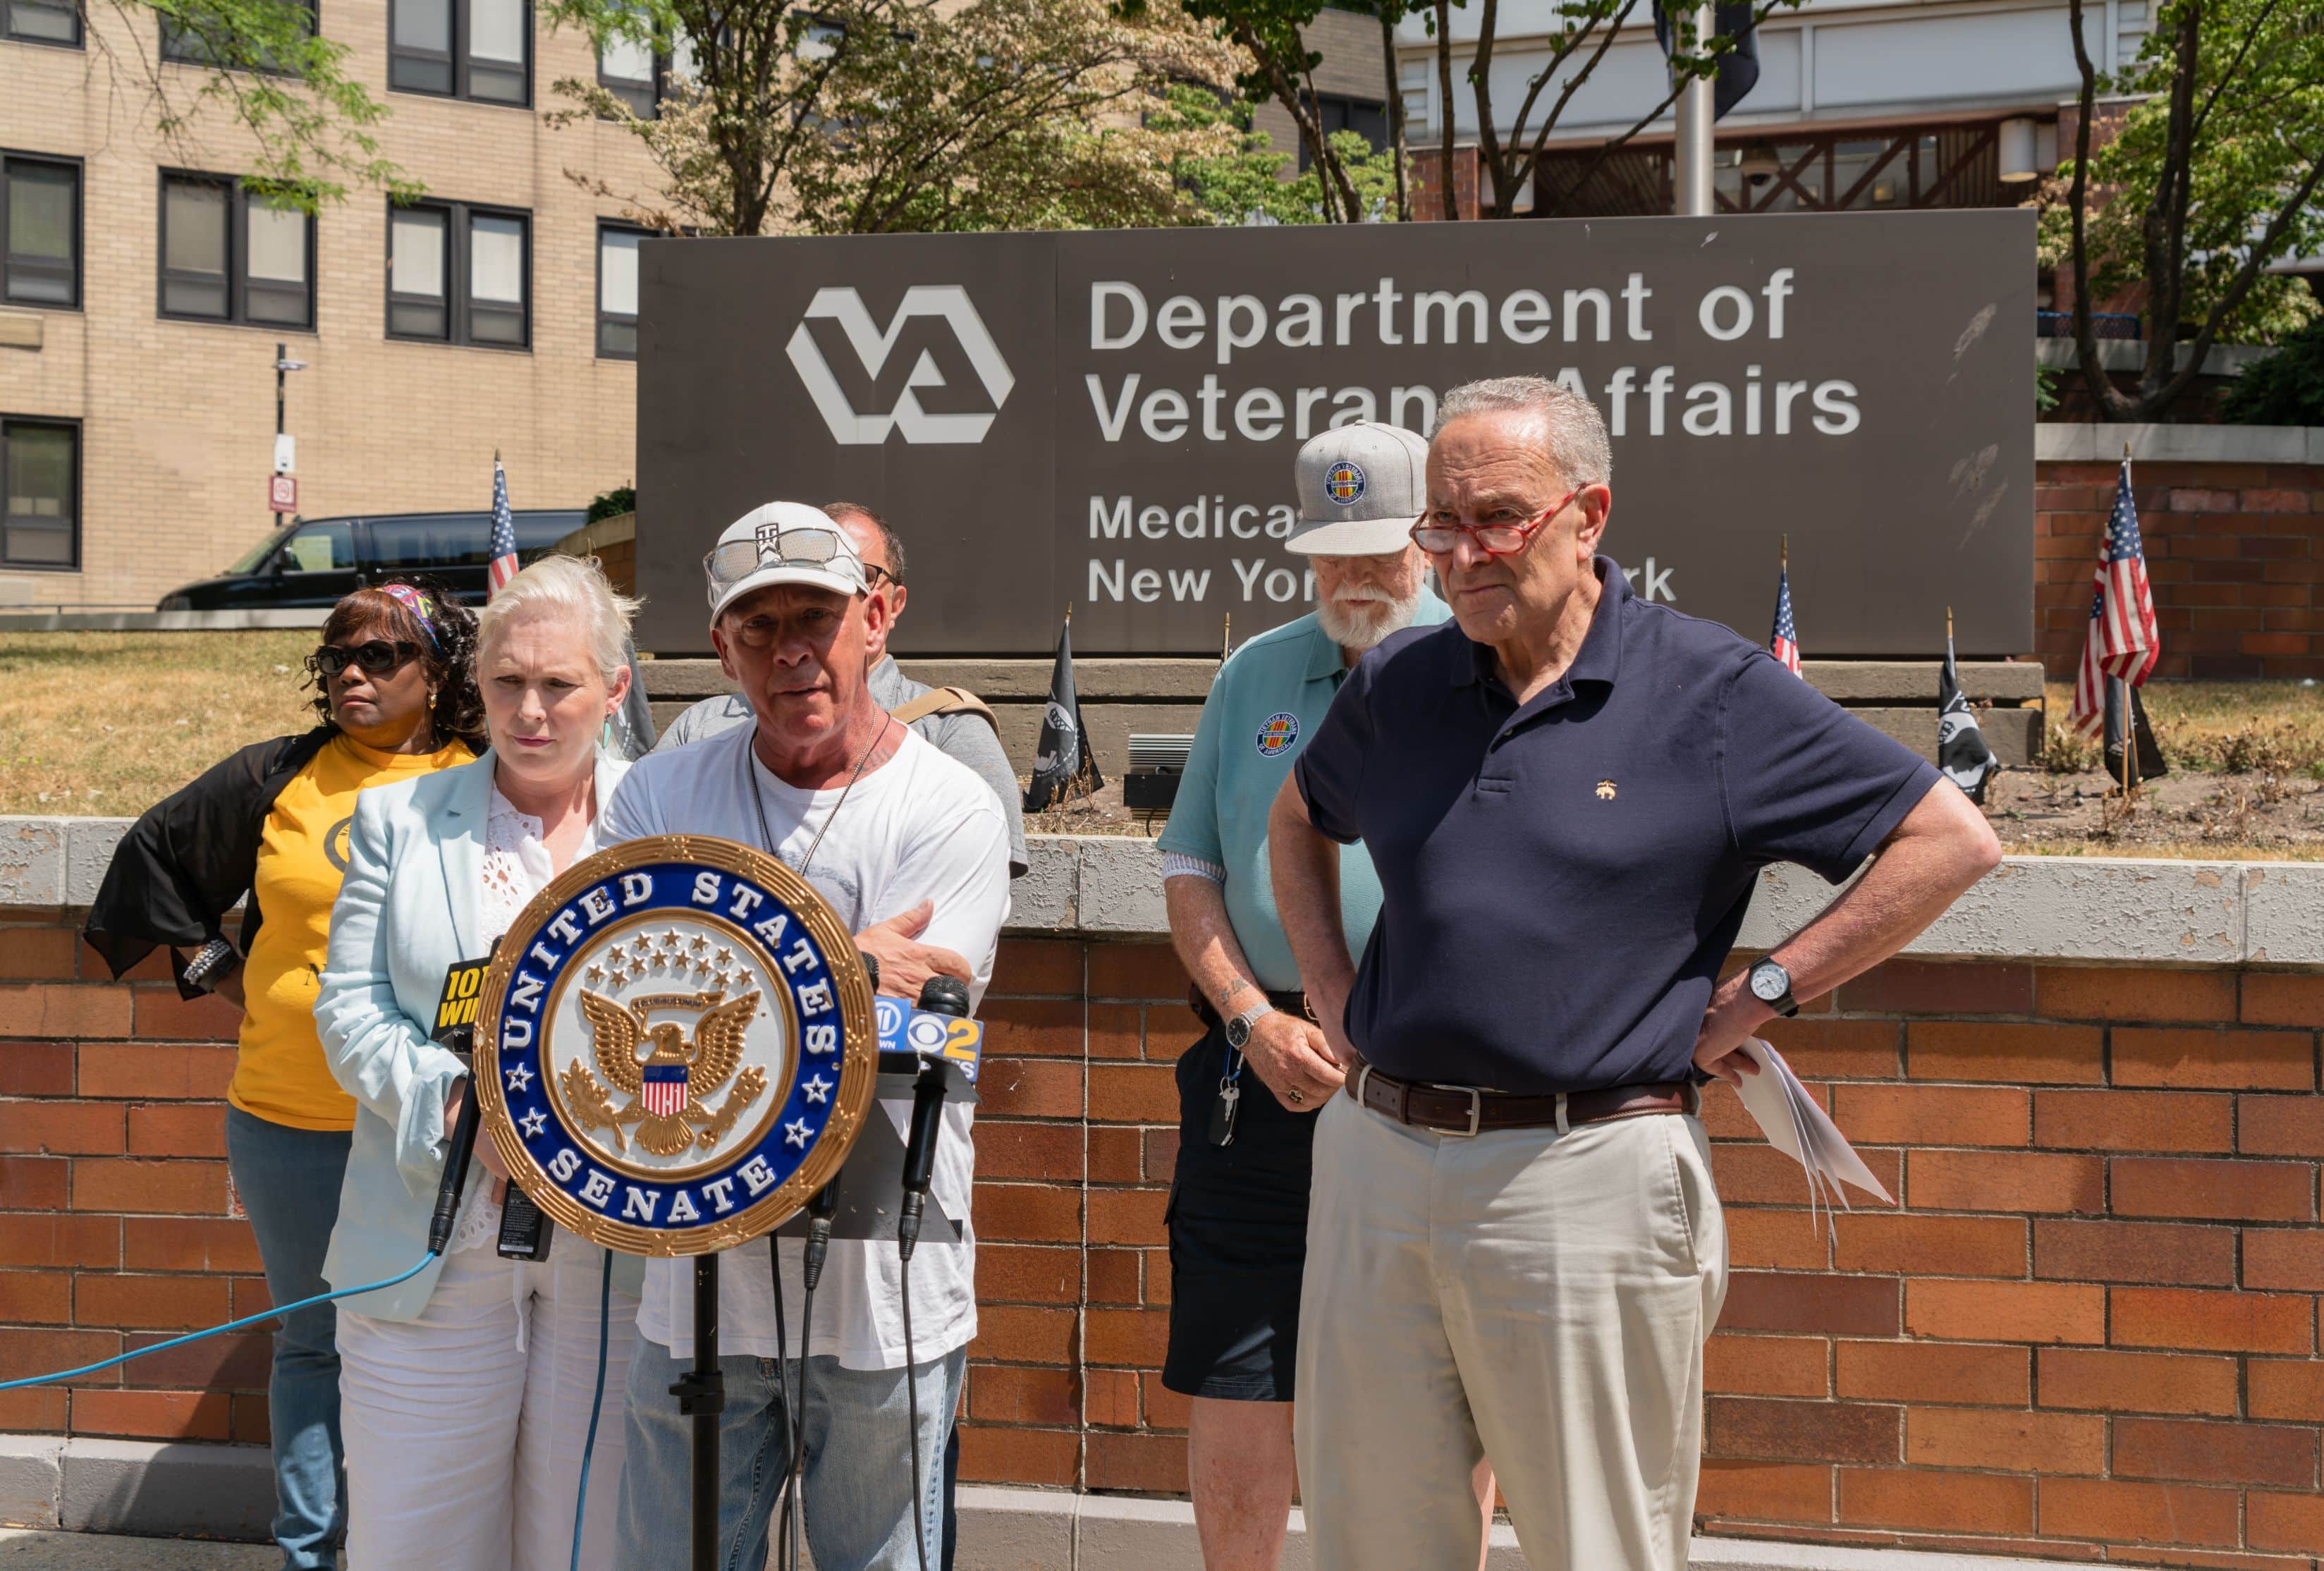 New York City, NY USA July 31, 2022. Senator Schumer and Gillibrand held a press conference at the Department for Veterans Affairs Medical Center, after Republicans refuse to pass the PACT Act.